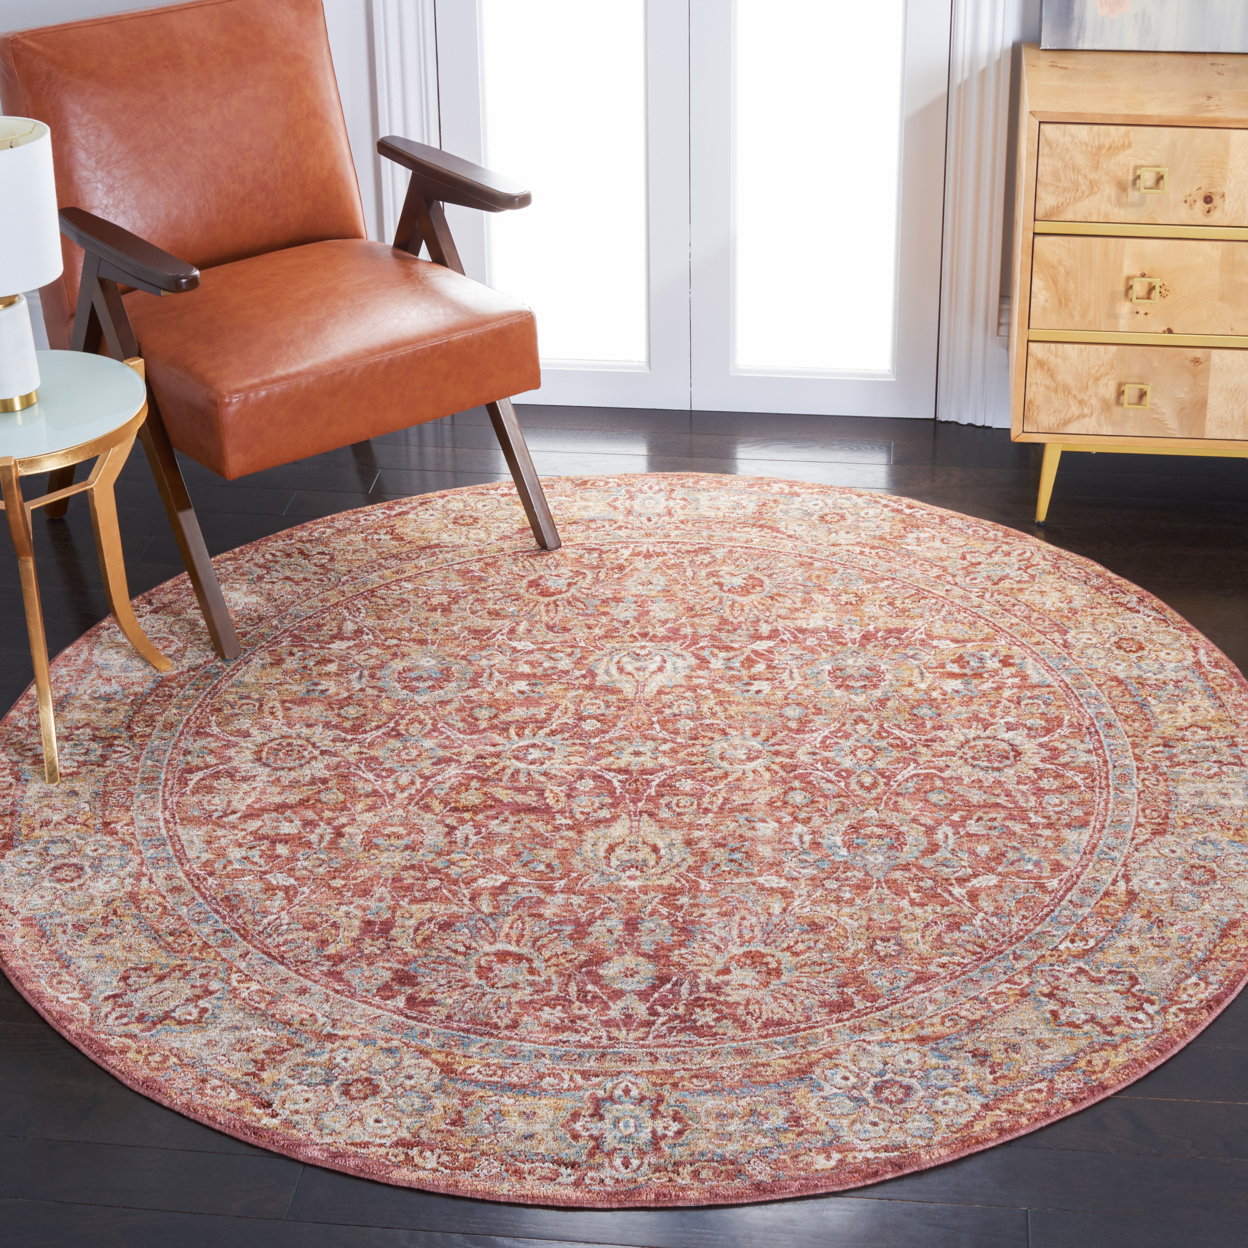 SAFAVIEH Valencia Collection VAL570P Rust / Teal Rug - 6' 4 Round